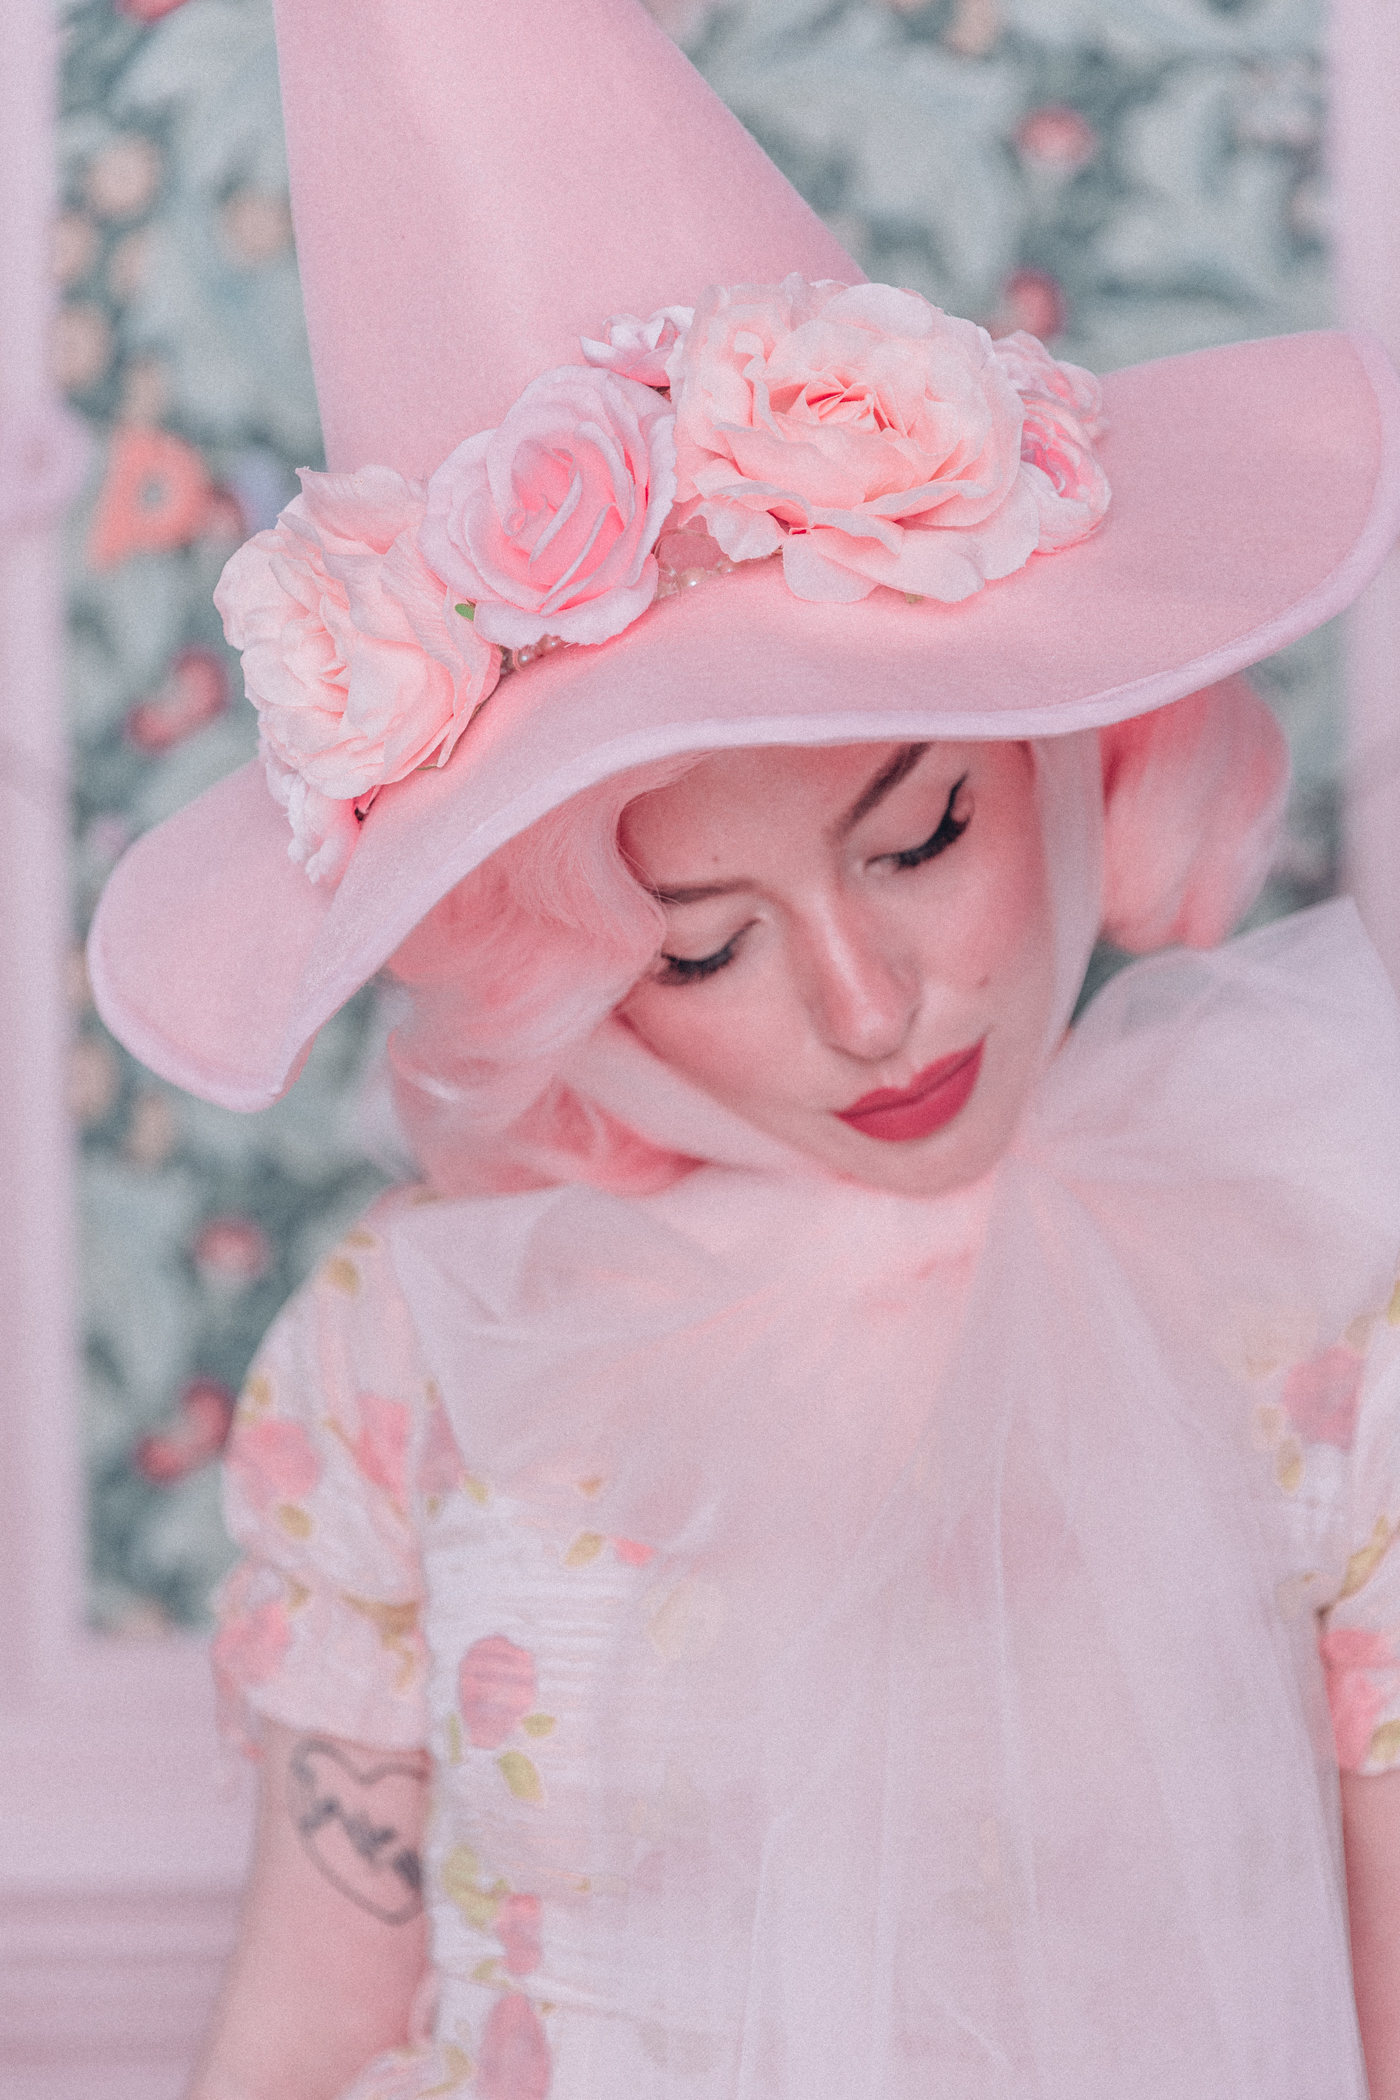 Woman wearing a pink witch hat with flowers and tulle ties